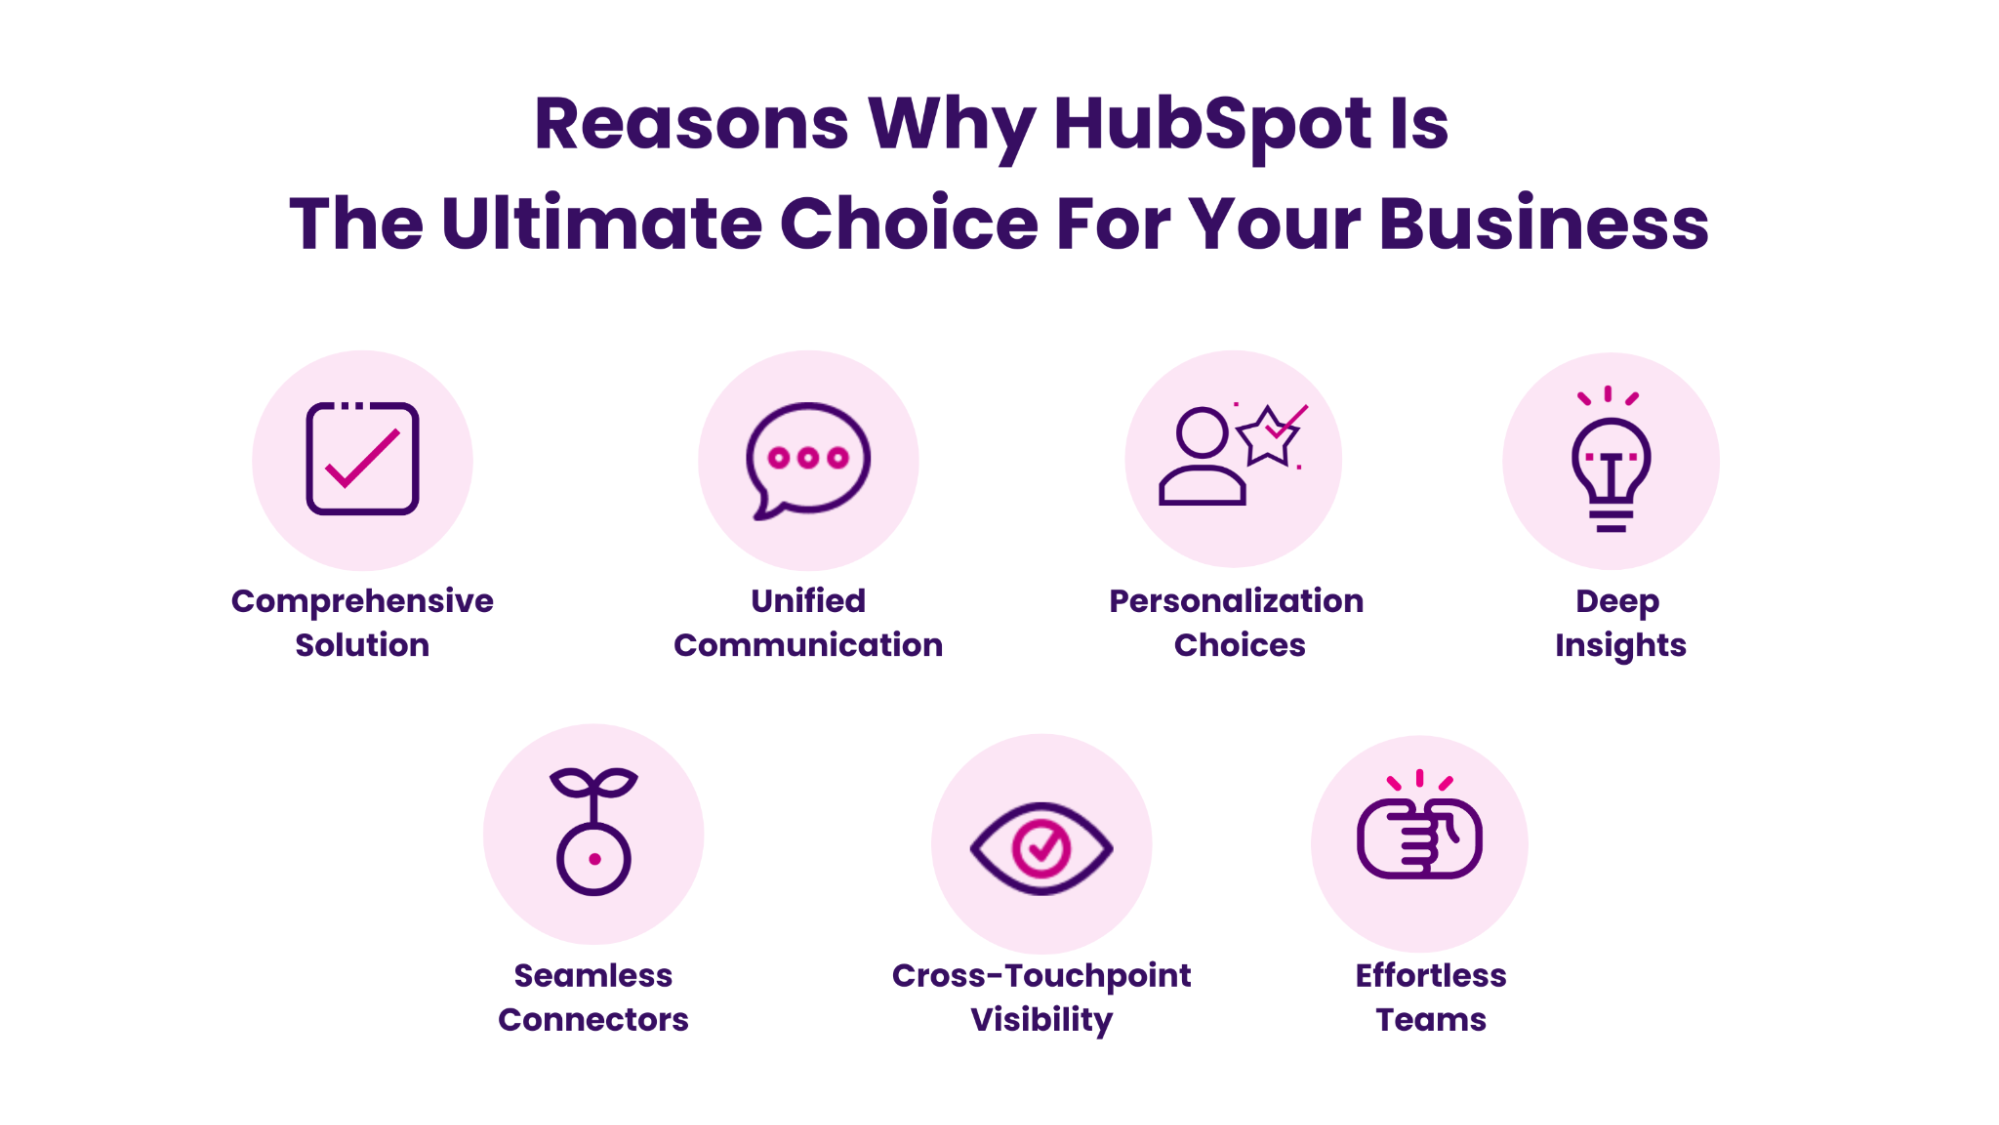 Reasons why HubSpot is the Ultimate choice for you